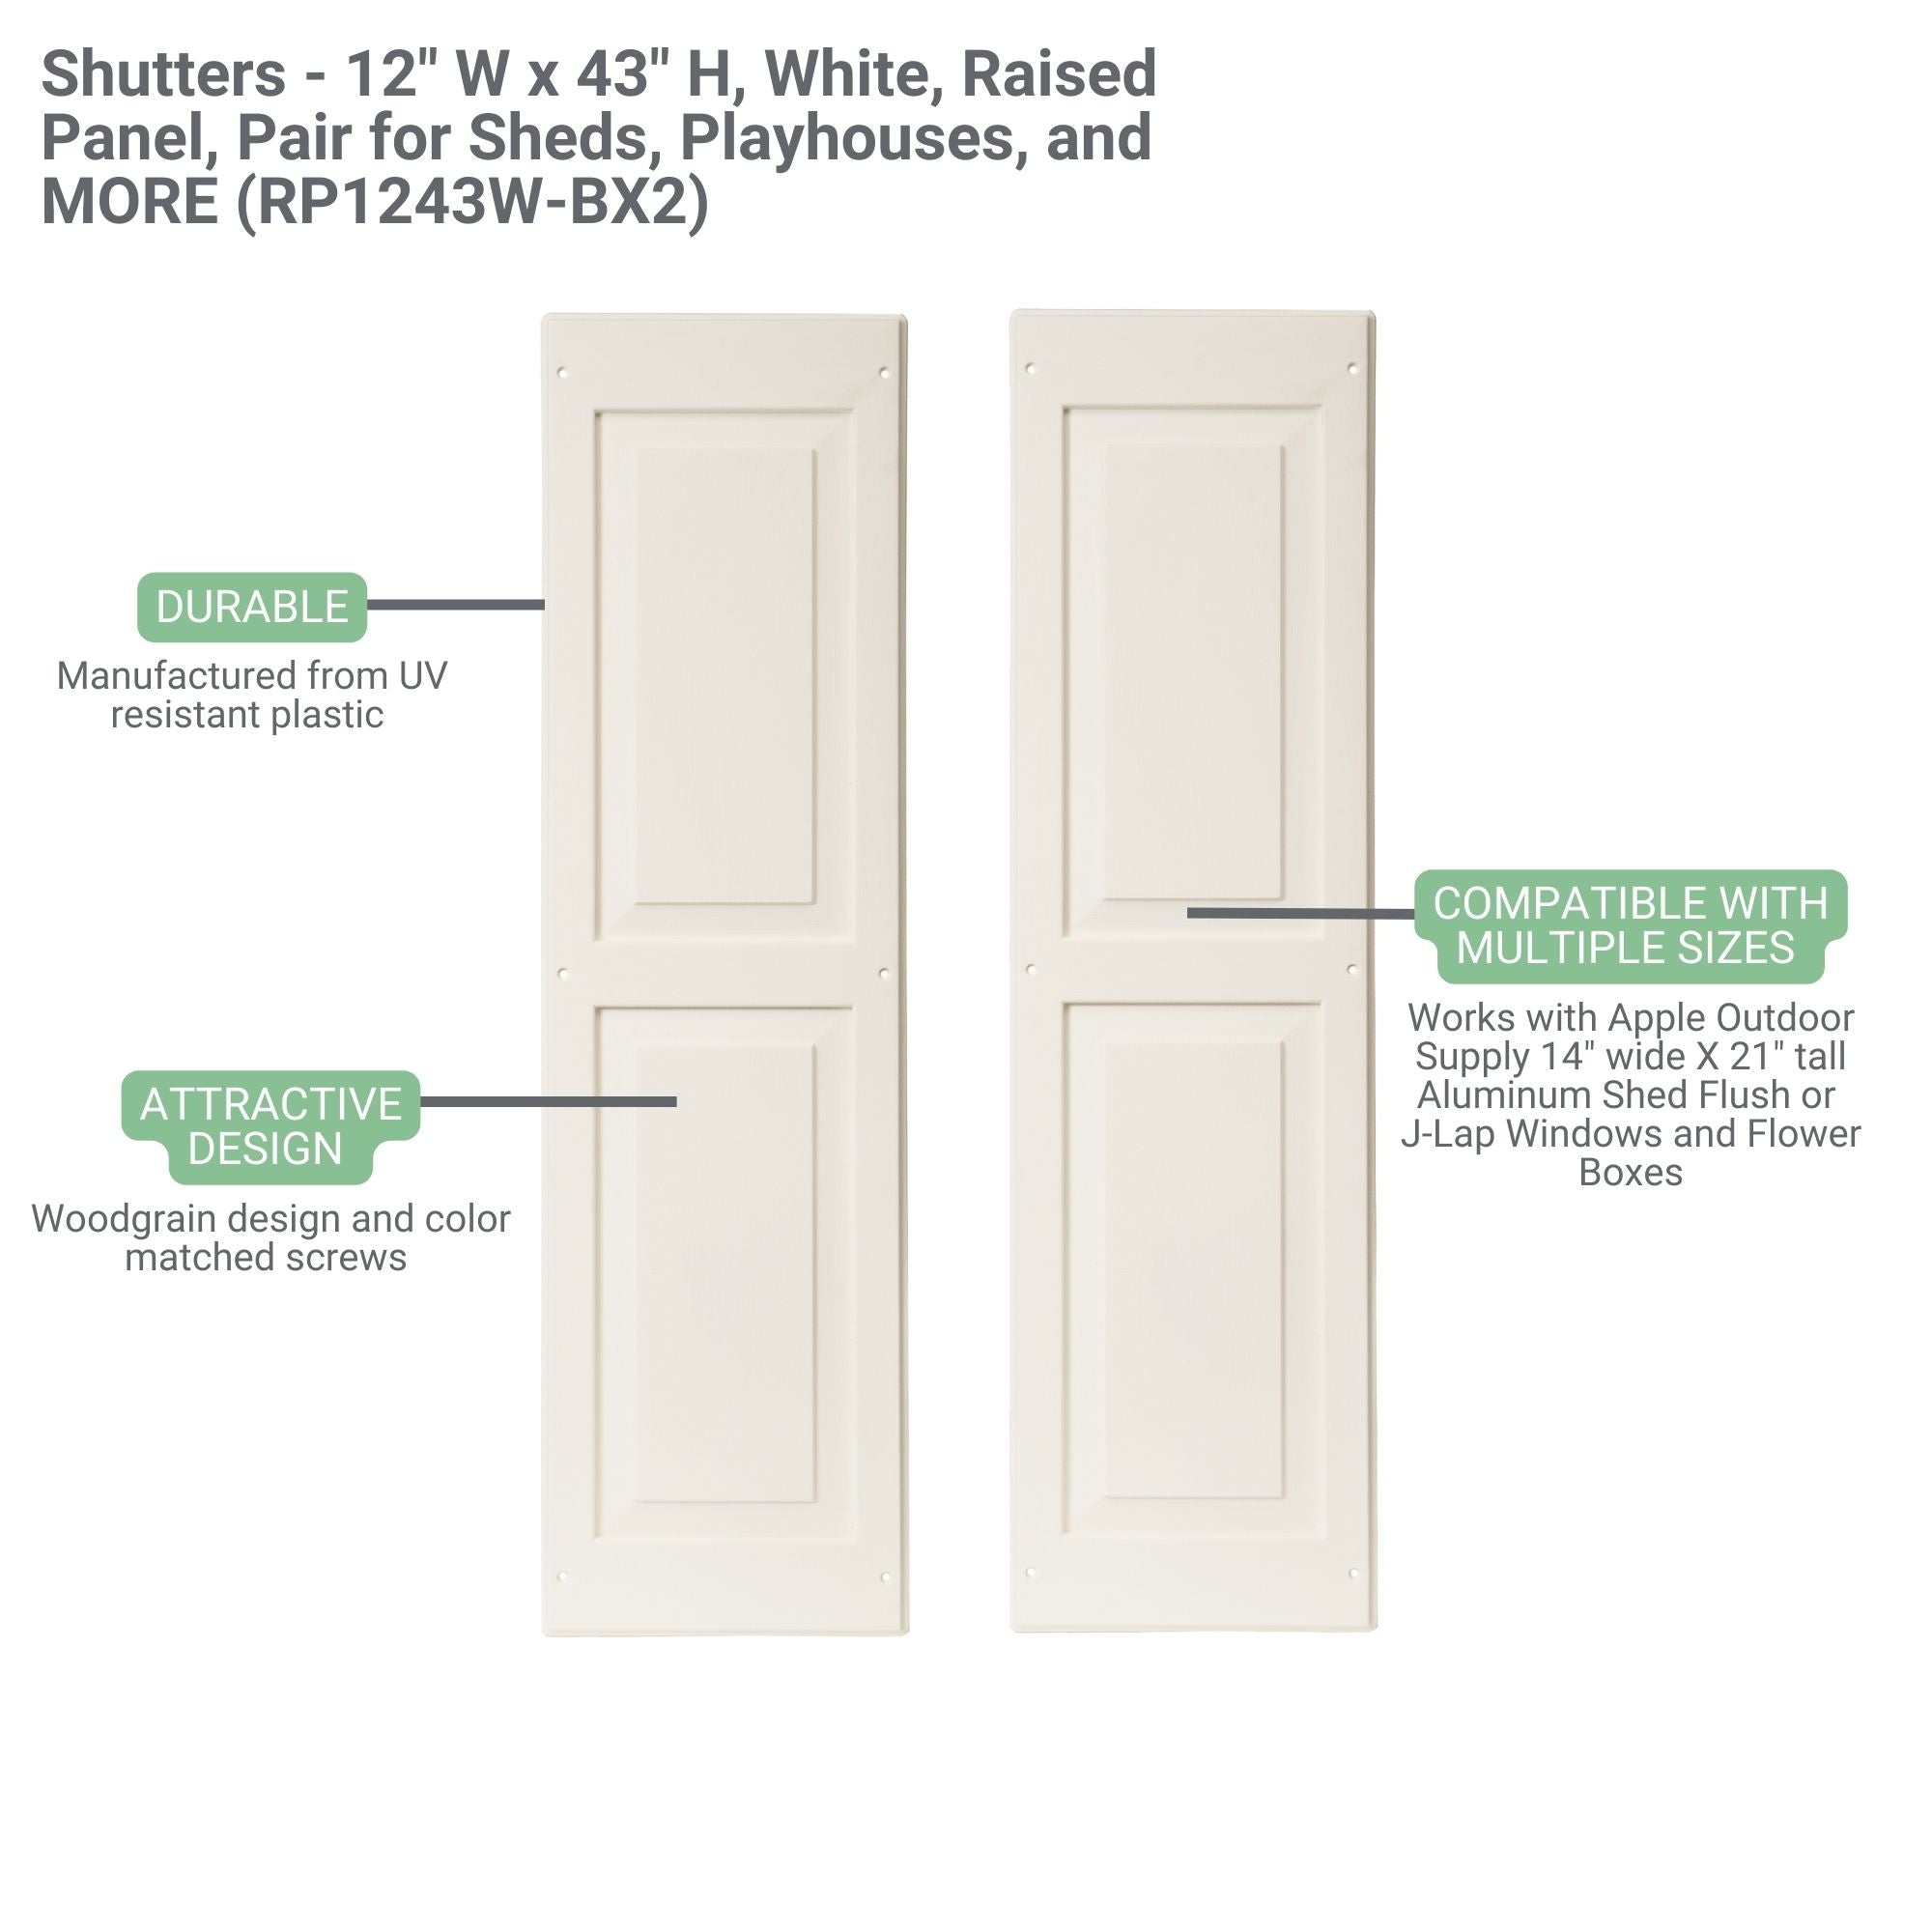 Shutters - 12" W x 43" H Raised Panel Shutters, Paintable 1 Pair